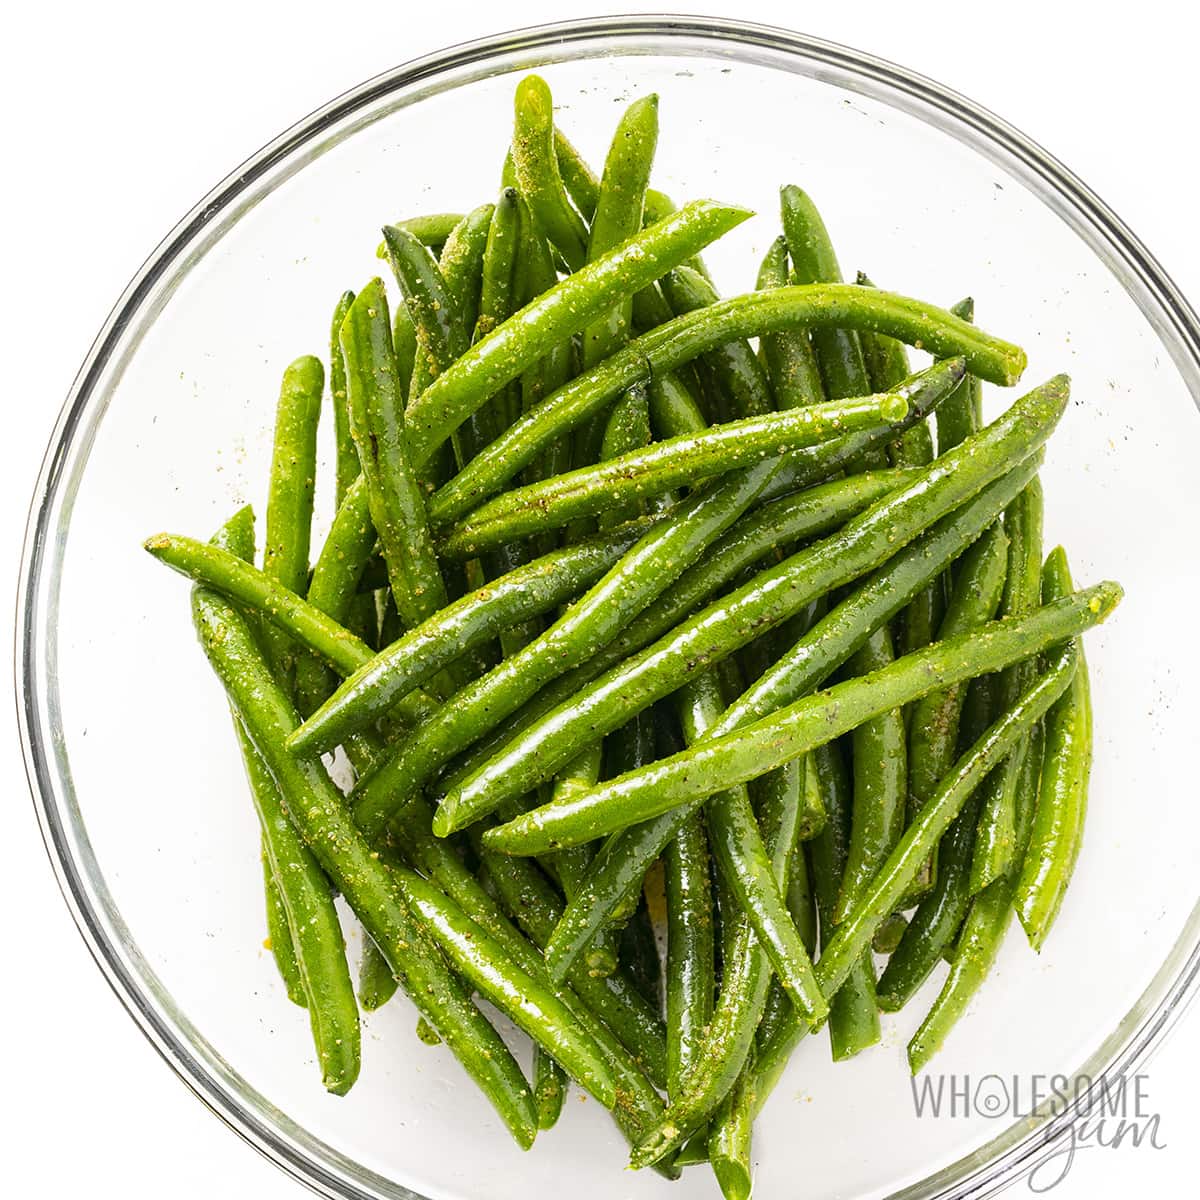 Seasoned green beans with garlic powder, salt, pepper, and olive oil.